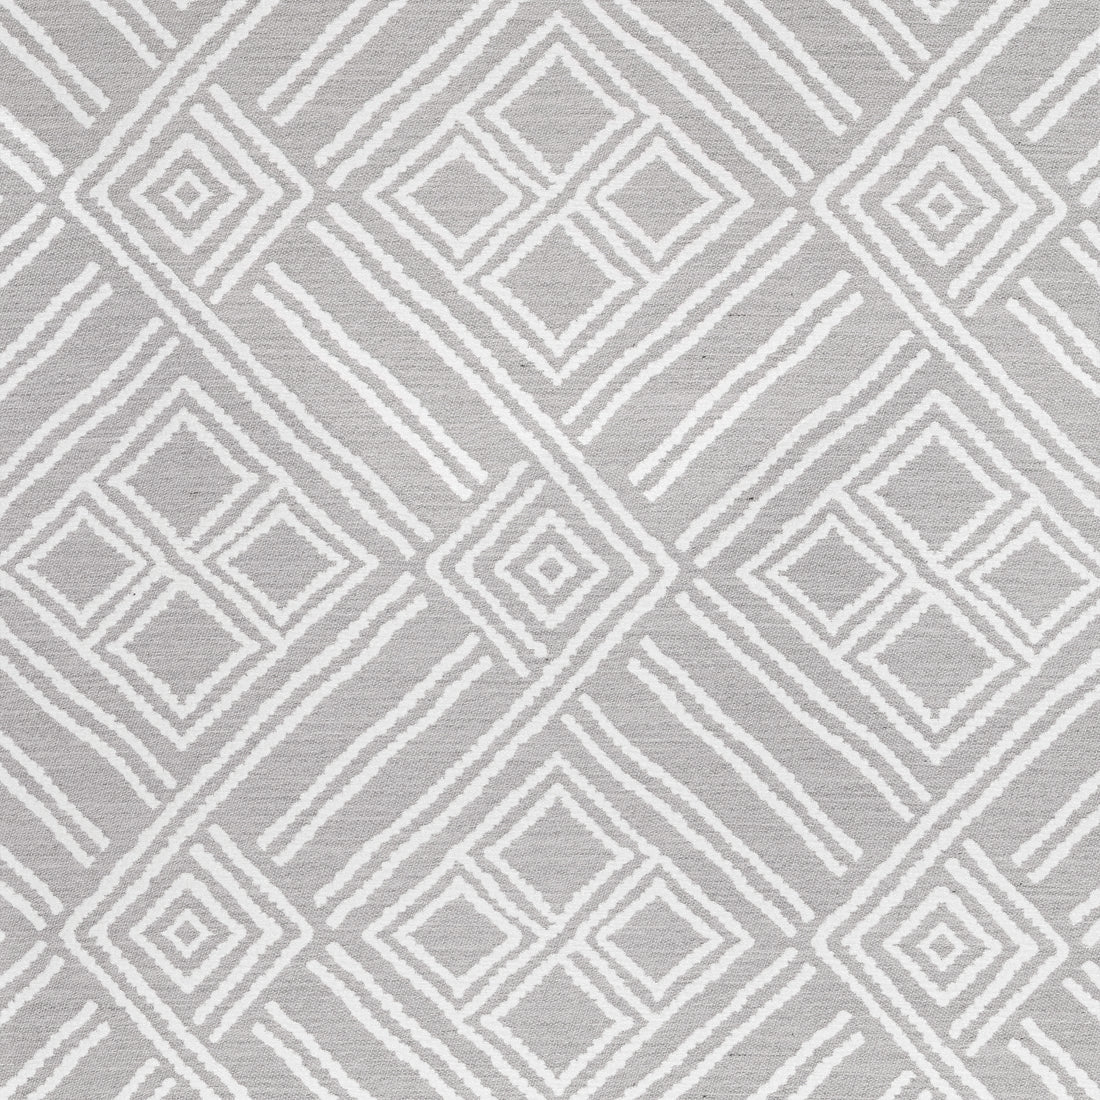 Terraza fabric in sterling color - pattern number W8606 - by Thibaut in the Villa collection